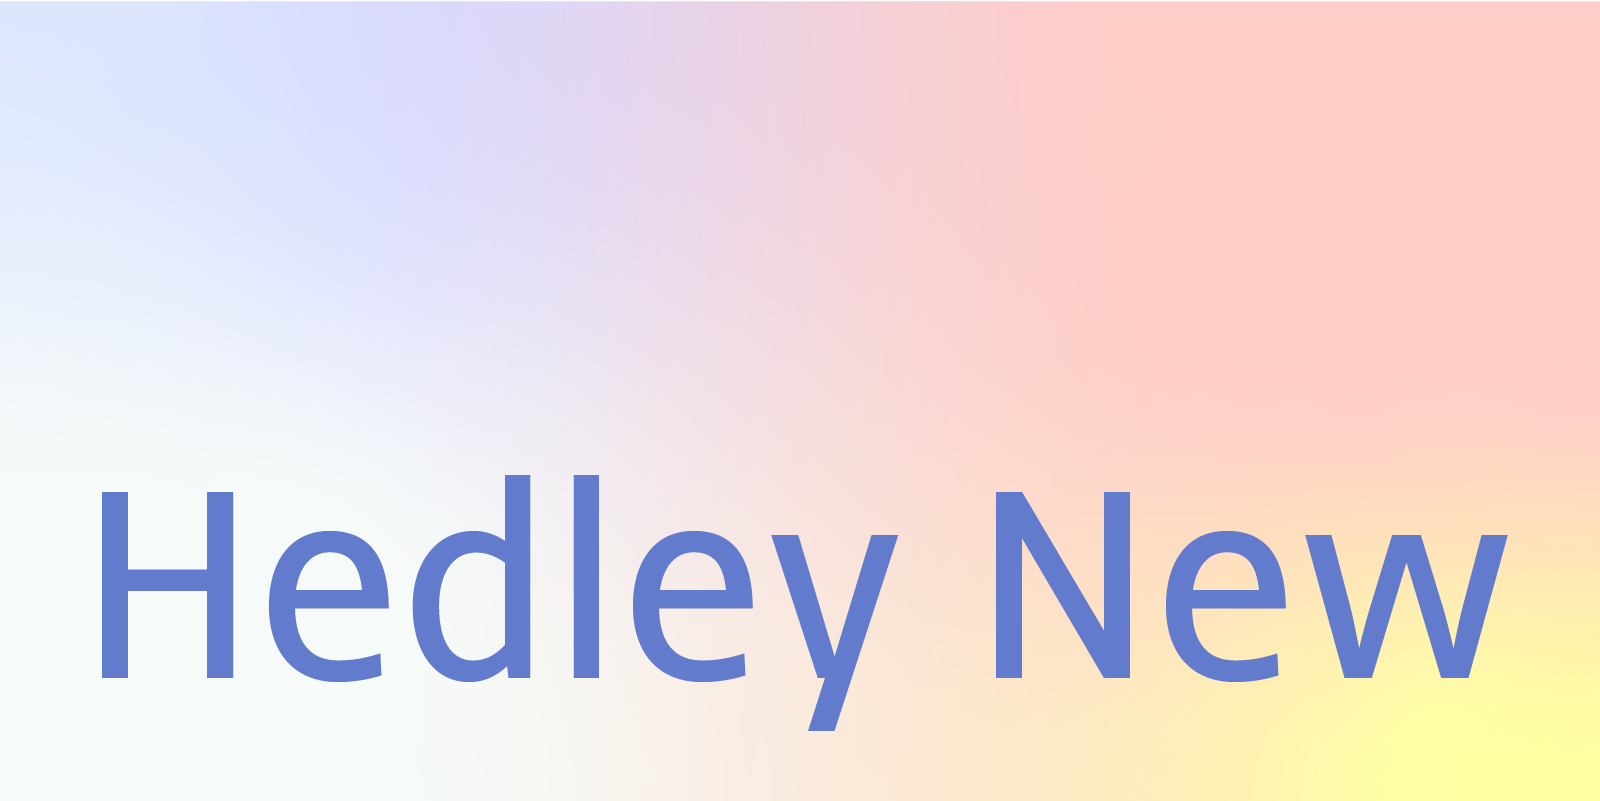 Card displaying Hedley New typeface in various styles